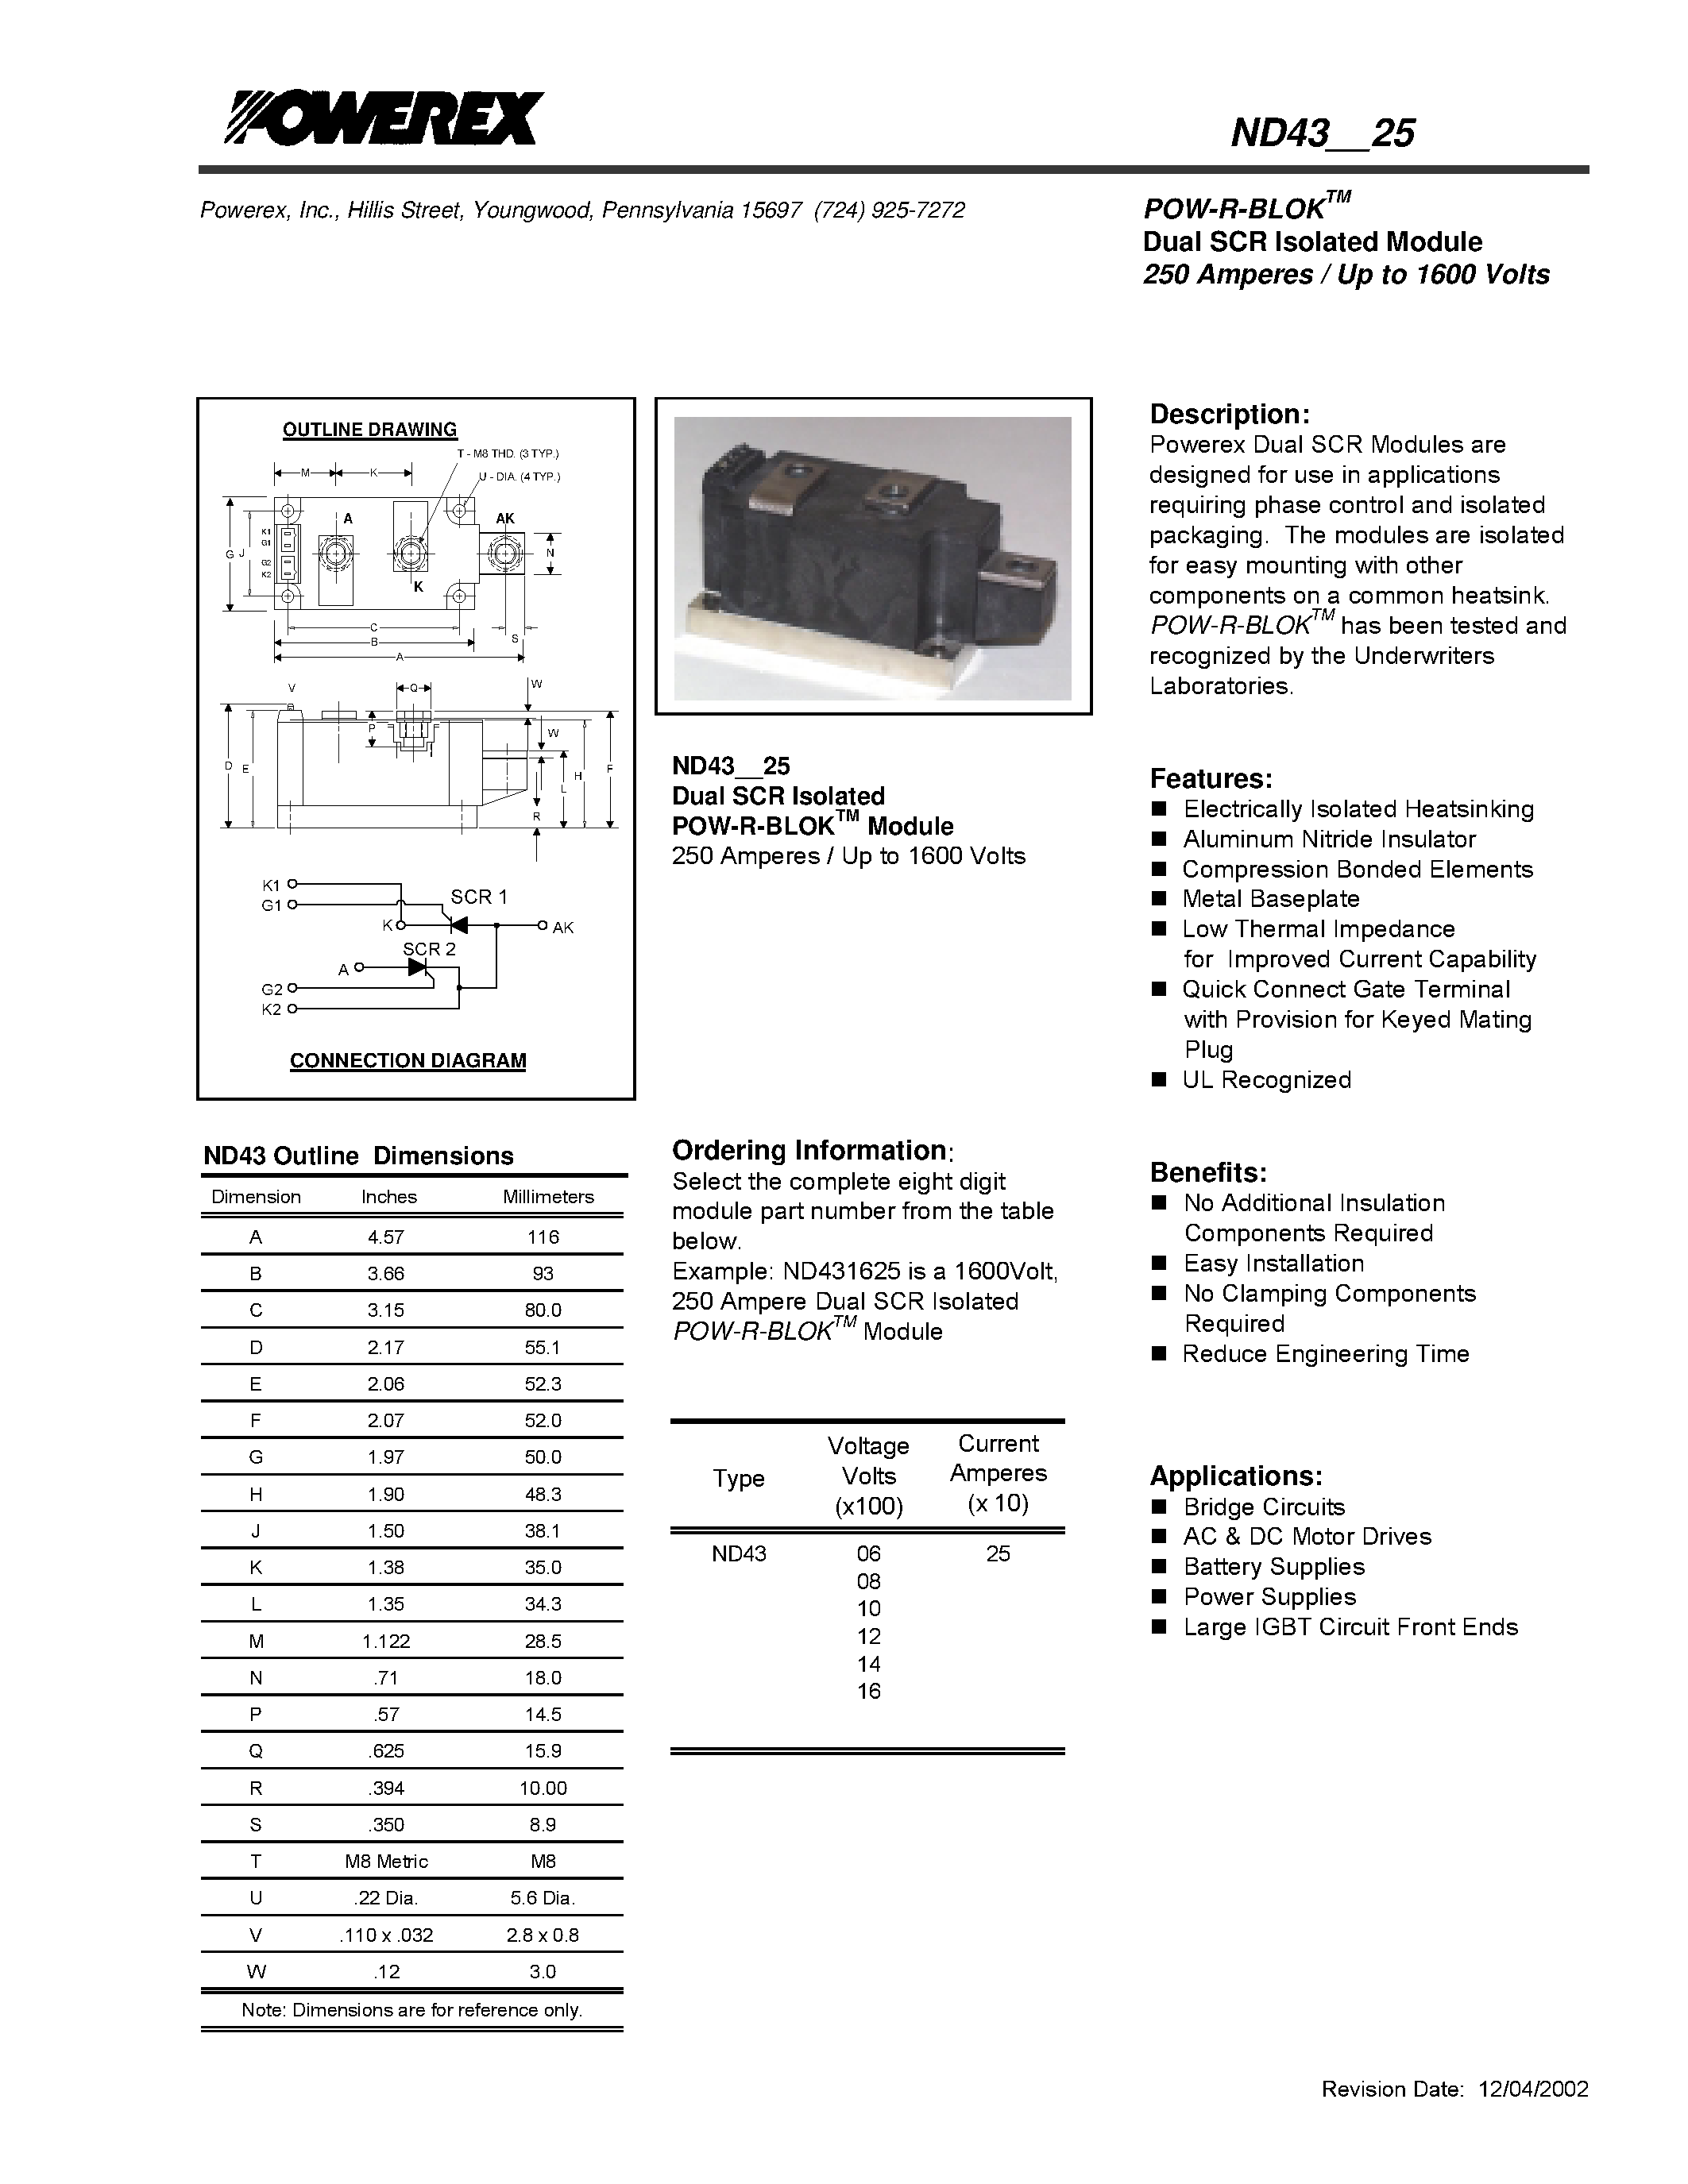 Datasheet ND4325 - POW-R-BLOK Dual SCR Isolated Module (250 Amperes / Up to 1600 Volts) page 1